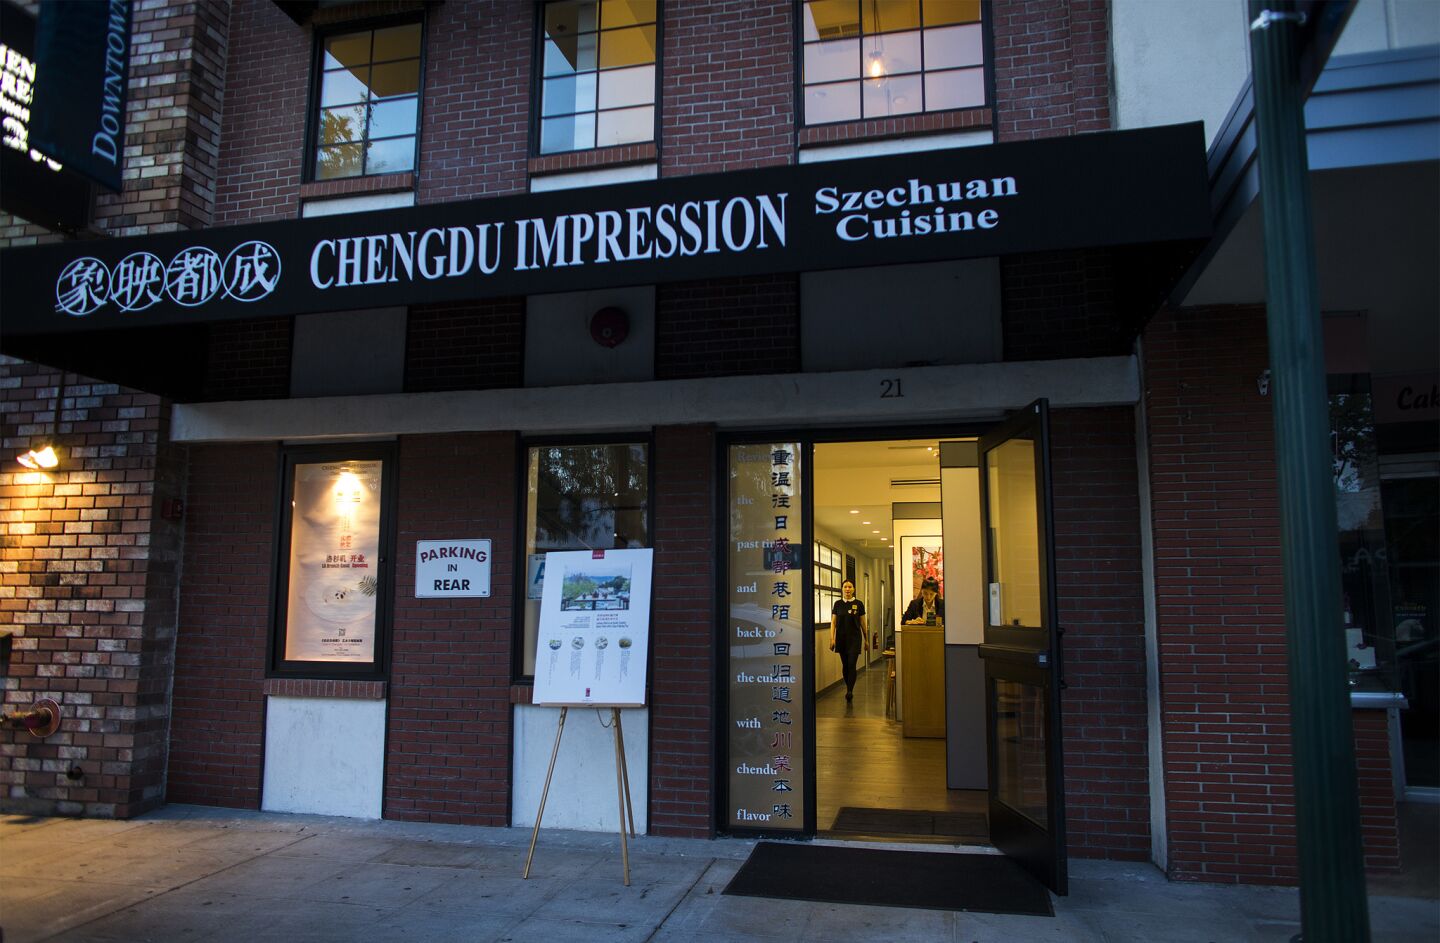 The Chengdu Impression location in Arcadia is a branch of a well-respected restaurant in Chengdu, China.